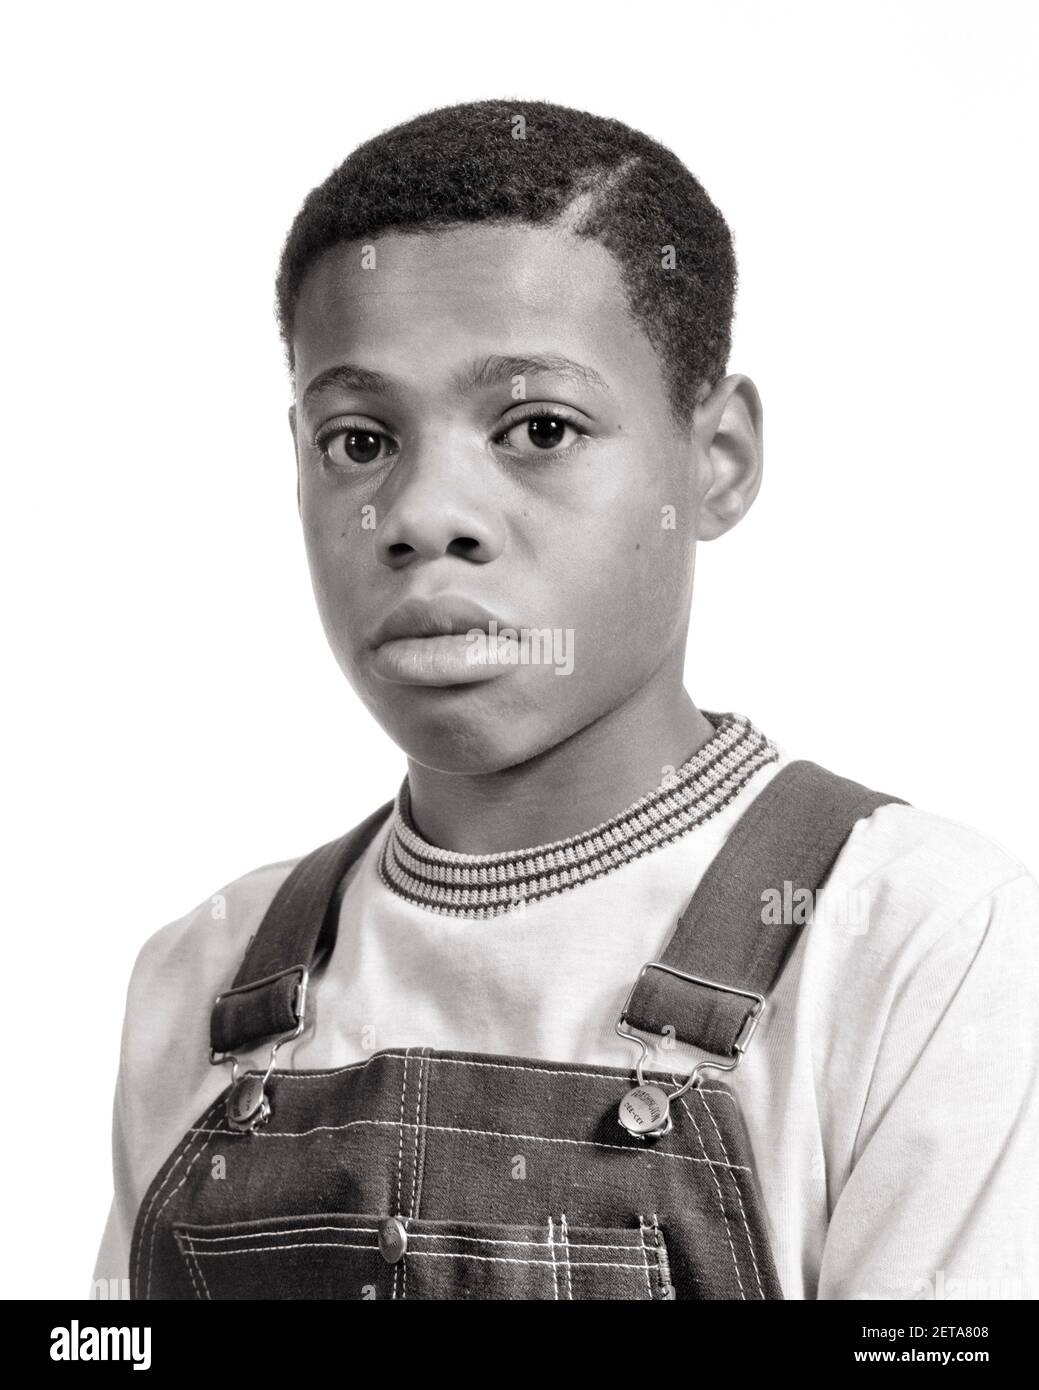 1970s PORTRAIT OF PRE-TEEN AFRICAN-AMERICAN BOY WEARING DENIM BIB OVERALLS SERIOUS FACIAL EXPRESSION LOOKING AT CAMERA  - b25648 HAR001 HARS SADNESS EYE CONTACT HEAD AND SHOULDERS AFRICAN-AMERICANS AFRICAN-AMERICAN BLACK ETHNICITY TEENAGED SINCERE SOLEMN BIB FOCUSED INTENSE JUVENILES PRE-TEEN PRE-TEEN BOY BLACK AND WHITE CAREFUL EARNEST HAR001 INTENT OLD FASHIONED AFRICAN AMERICANS Stock Photo